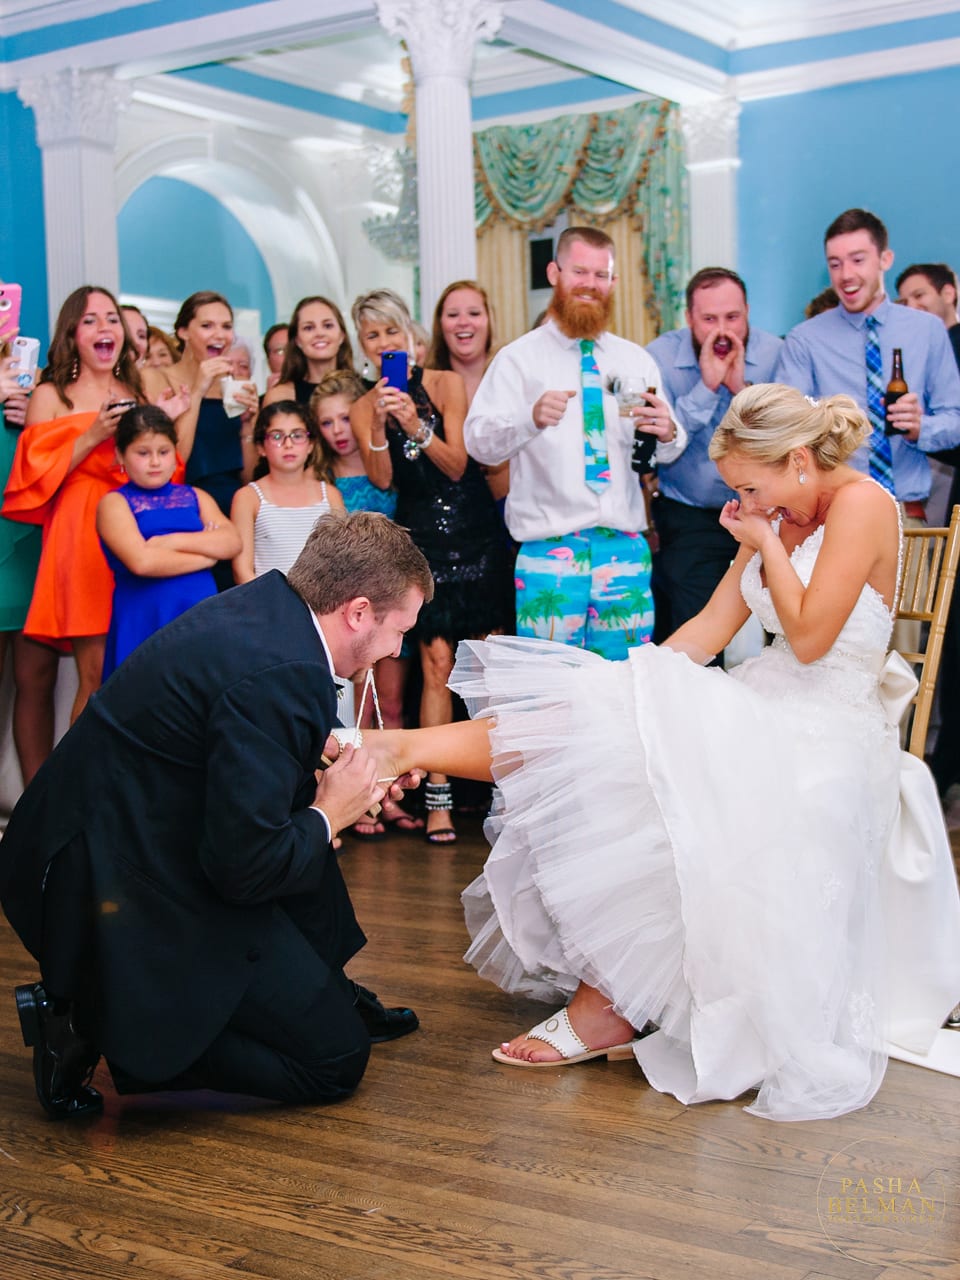 Myrtle Beach Wedding Photography by Pasha Belman - Top Myrtle Beach Wedding Photographer at Pine Lakes Country Club. Wedding Dancing Photos